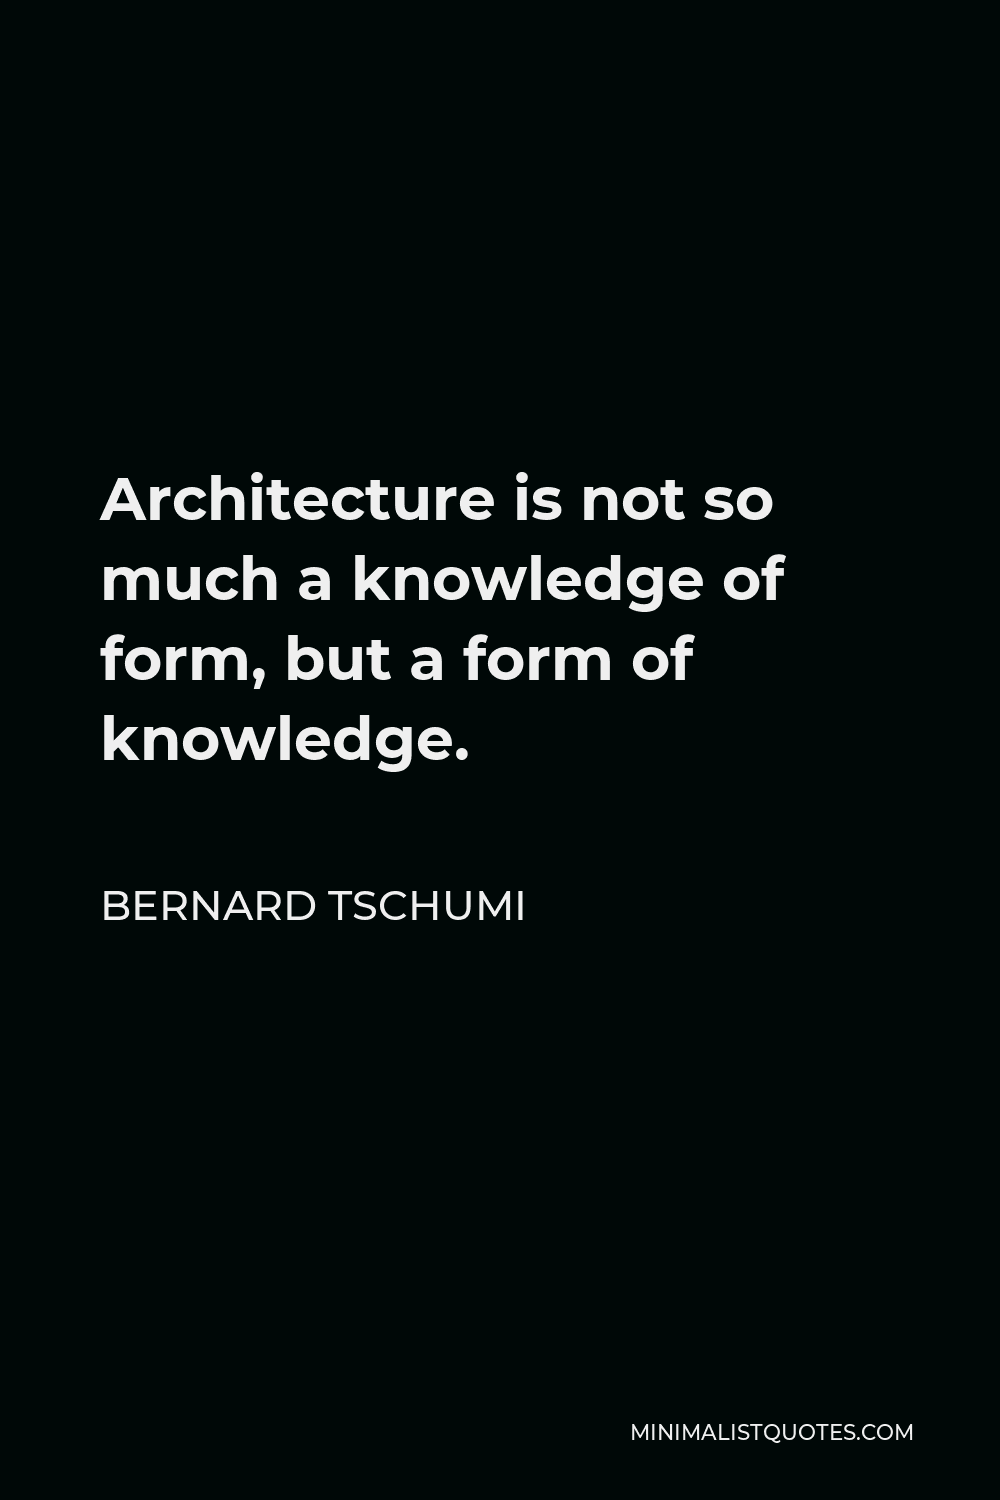 Bernard Tschumi Quote - Architecture is not so much a knowledge of form, but a form of knowledge.